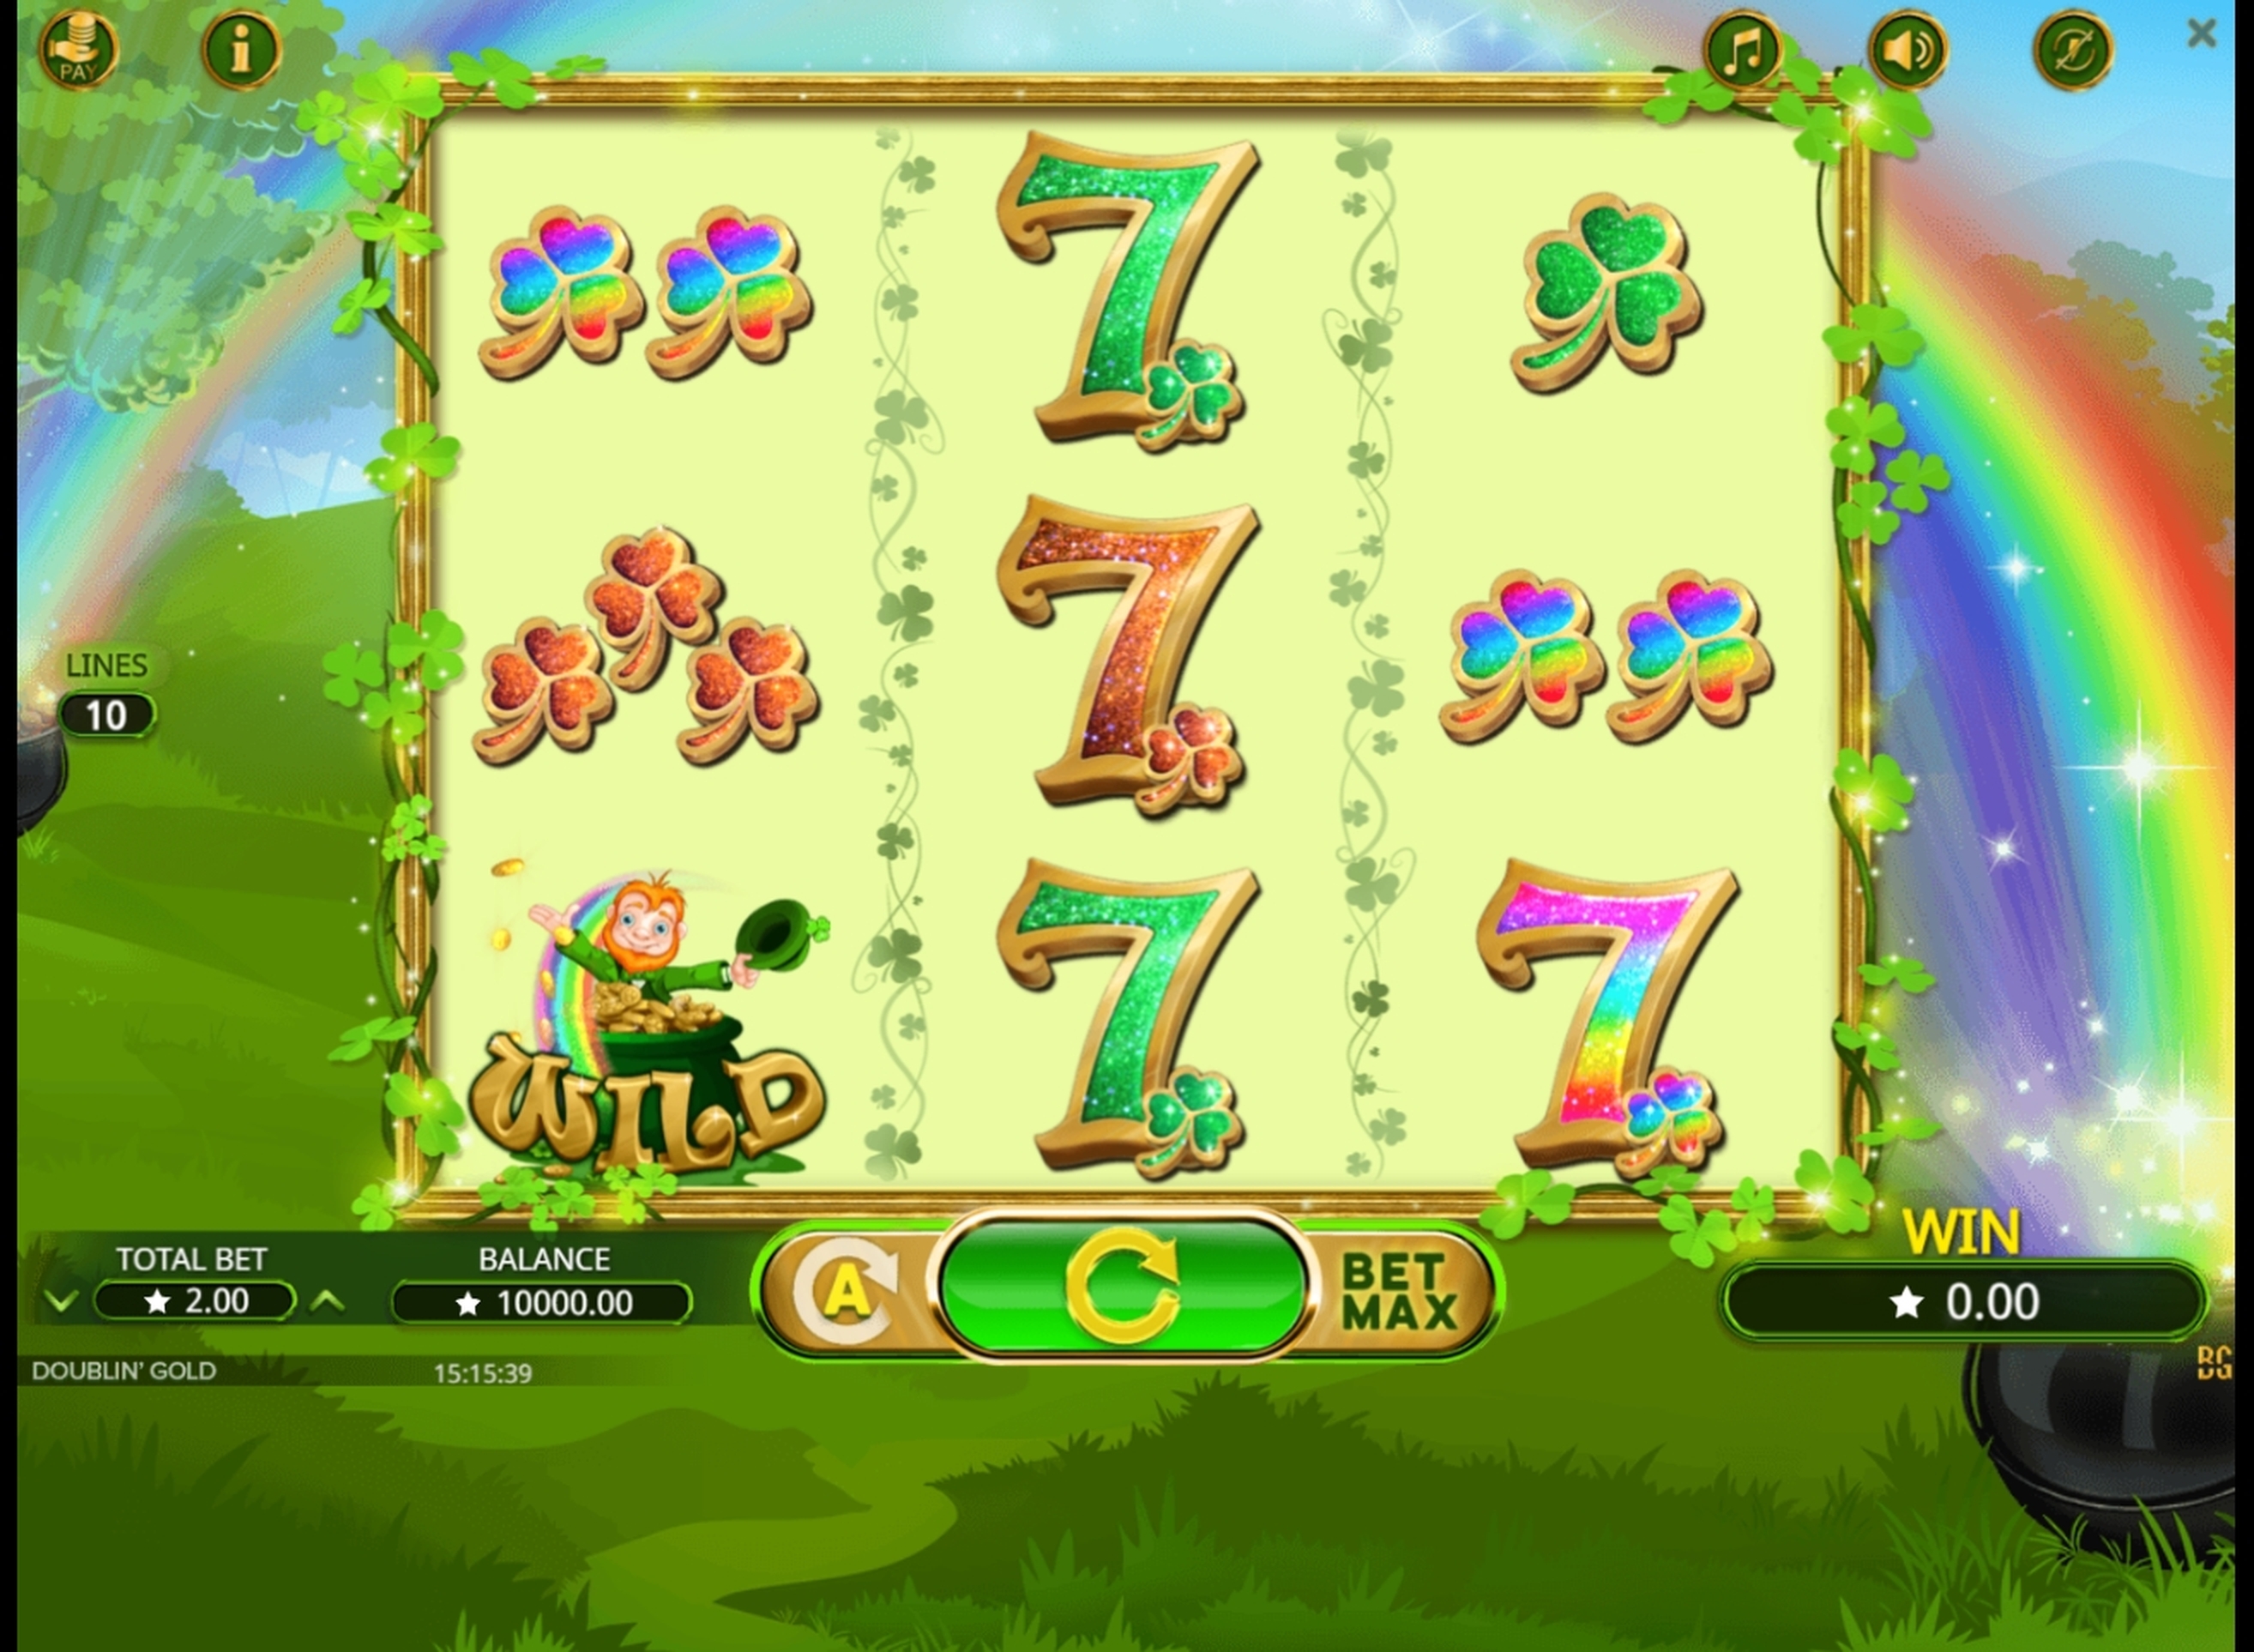 Reels in Doublin Gold Slot Game by Booming Games